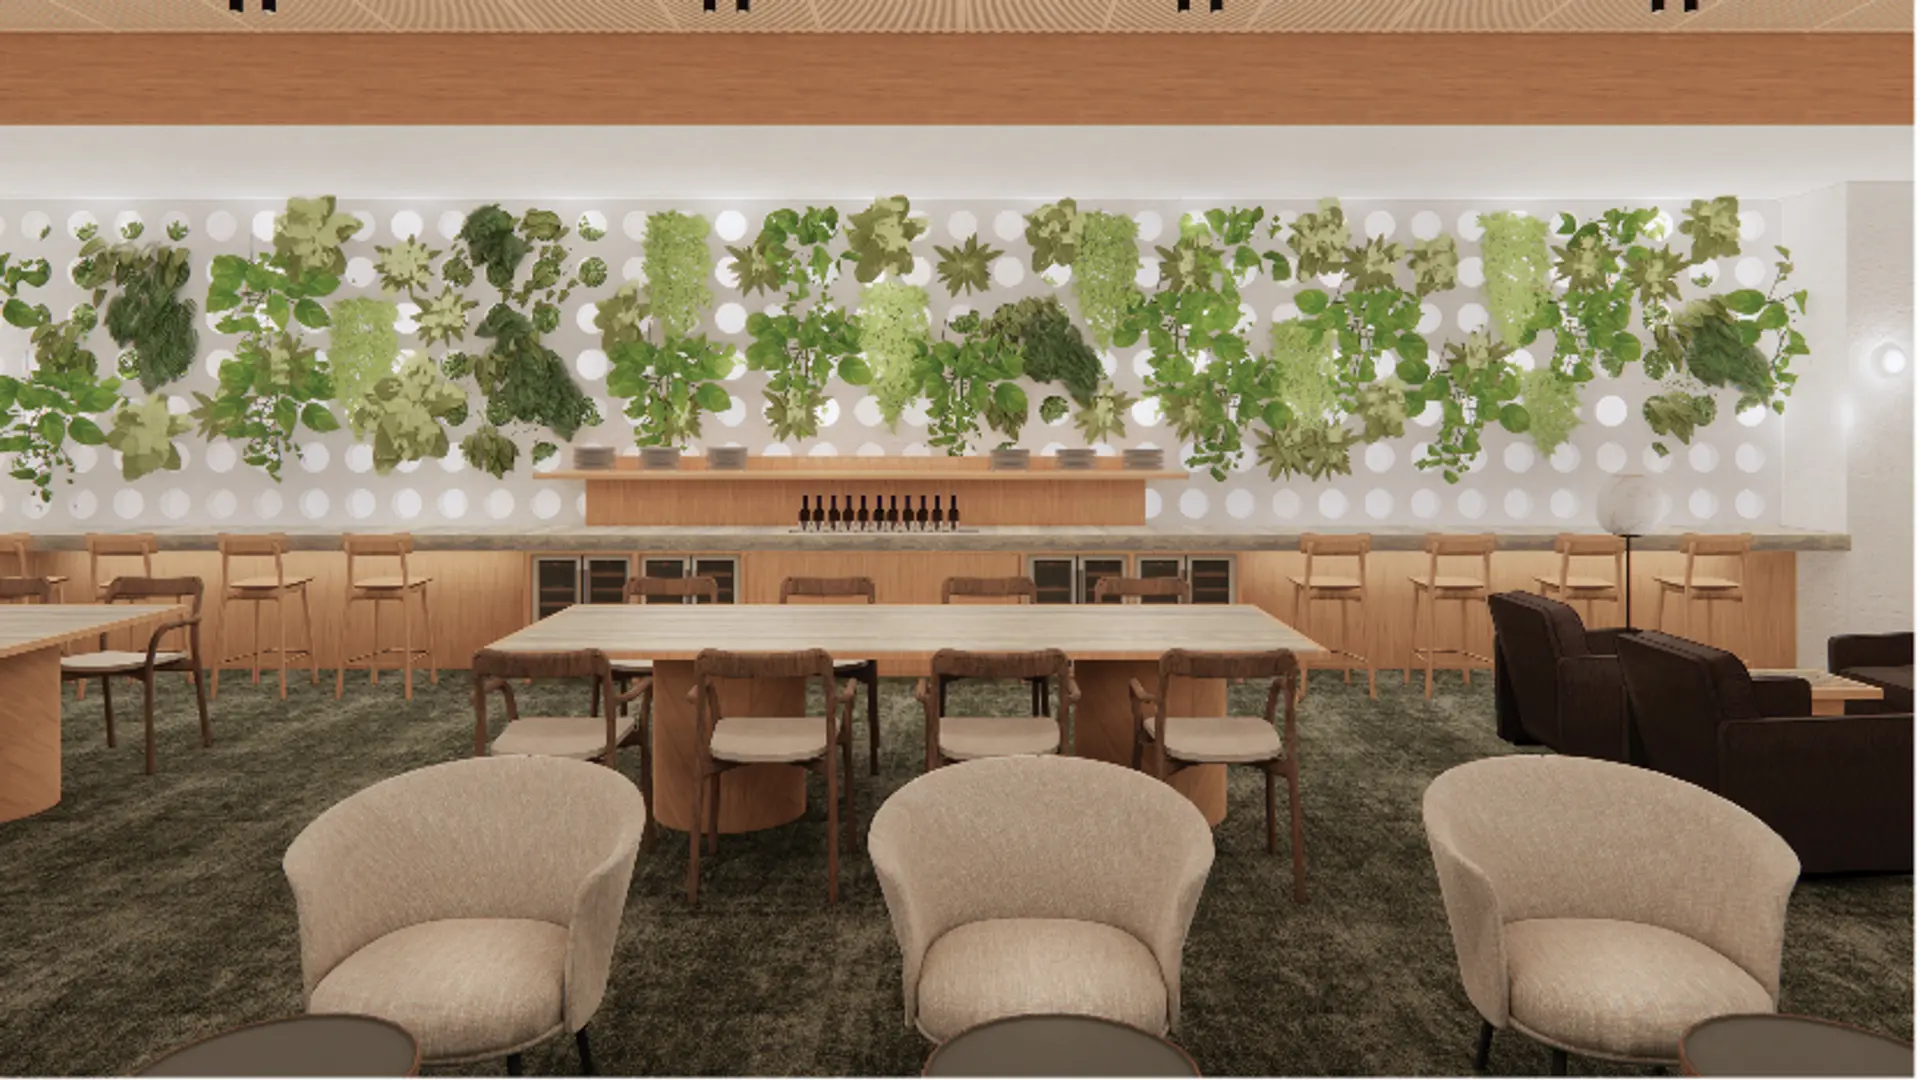 Airlines News - Qantas to open new First Class lounge at Heathrow T3